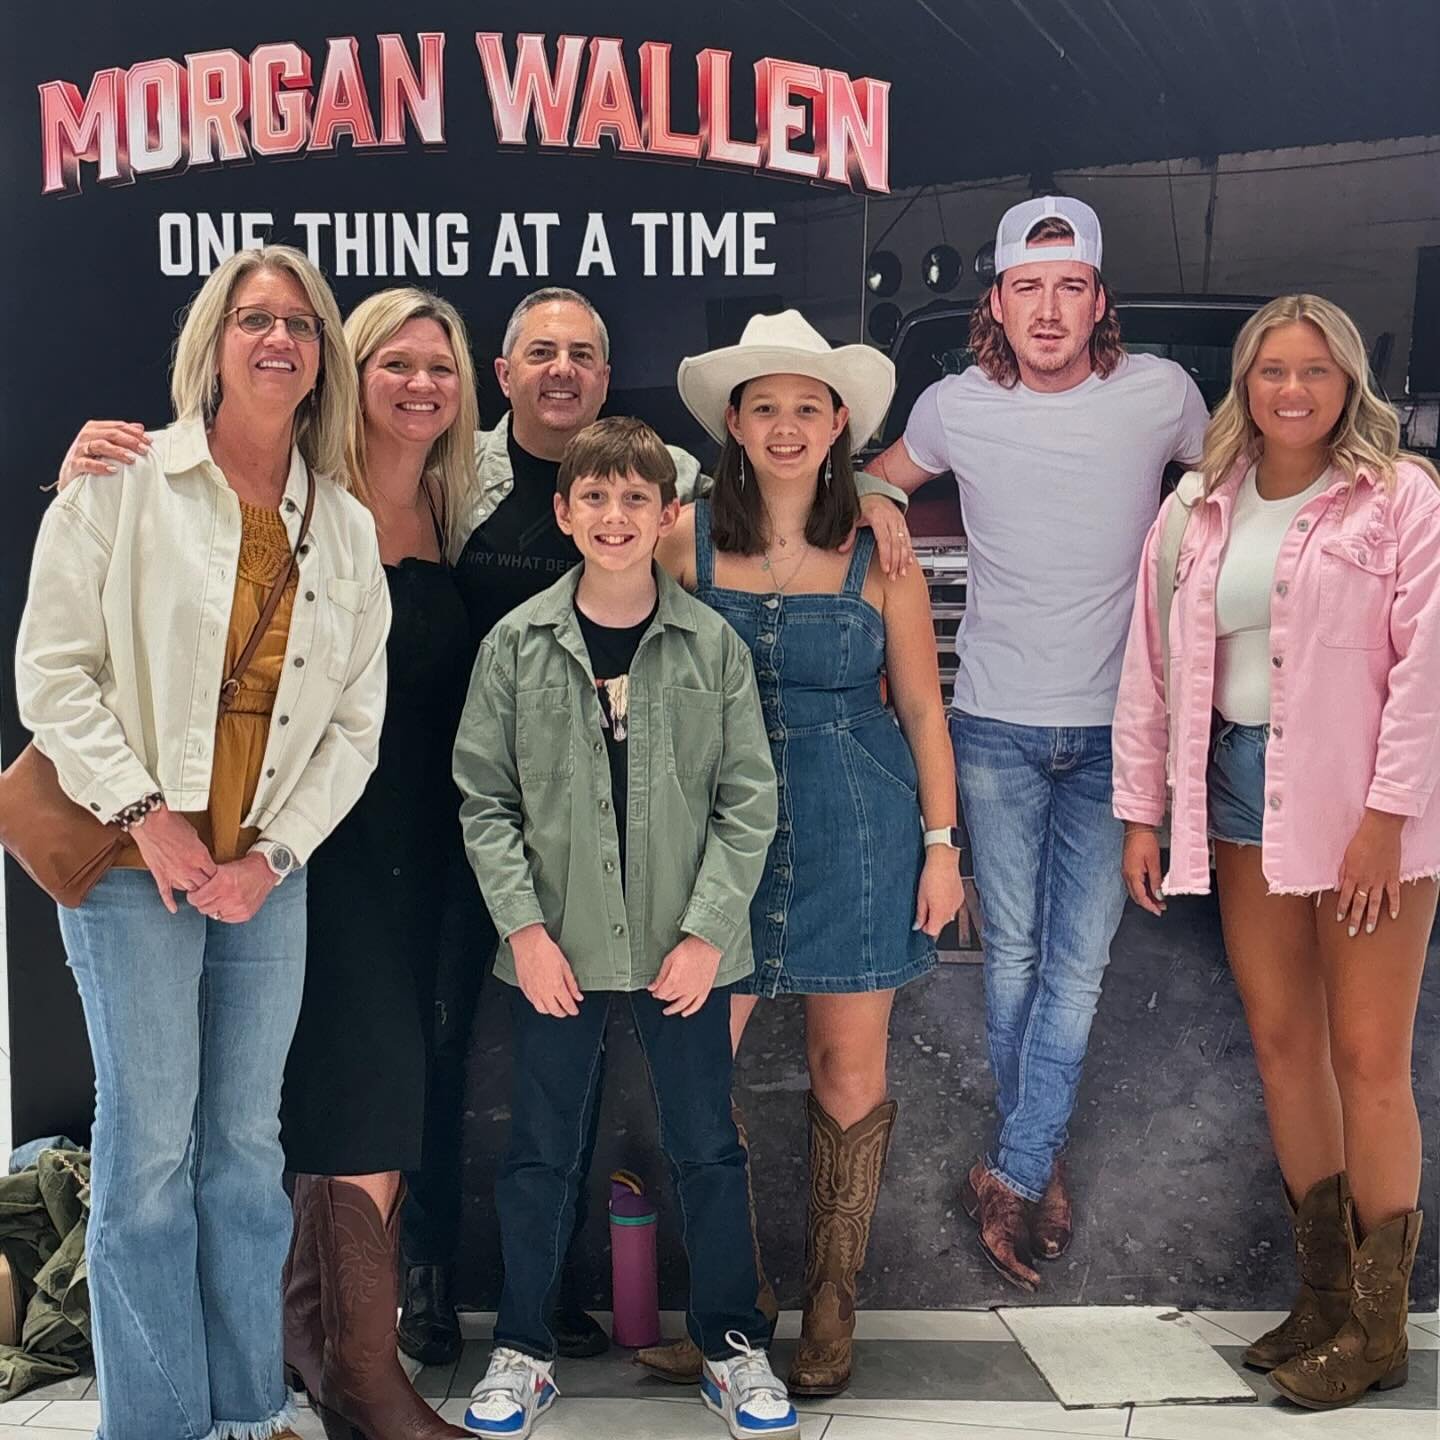 MORGAN WALLEN!!! Worth the wait!!! Amazing show and having my niece and sister join made it even better!!💕💕💕🤠🤠🤠 #longlivecowgirls